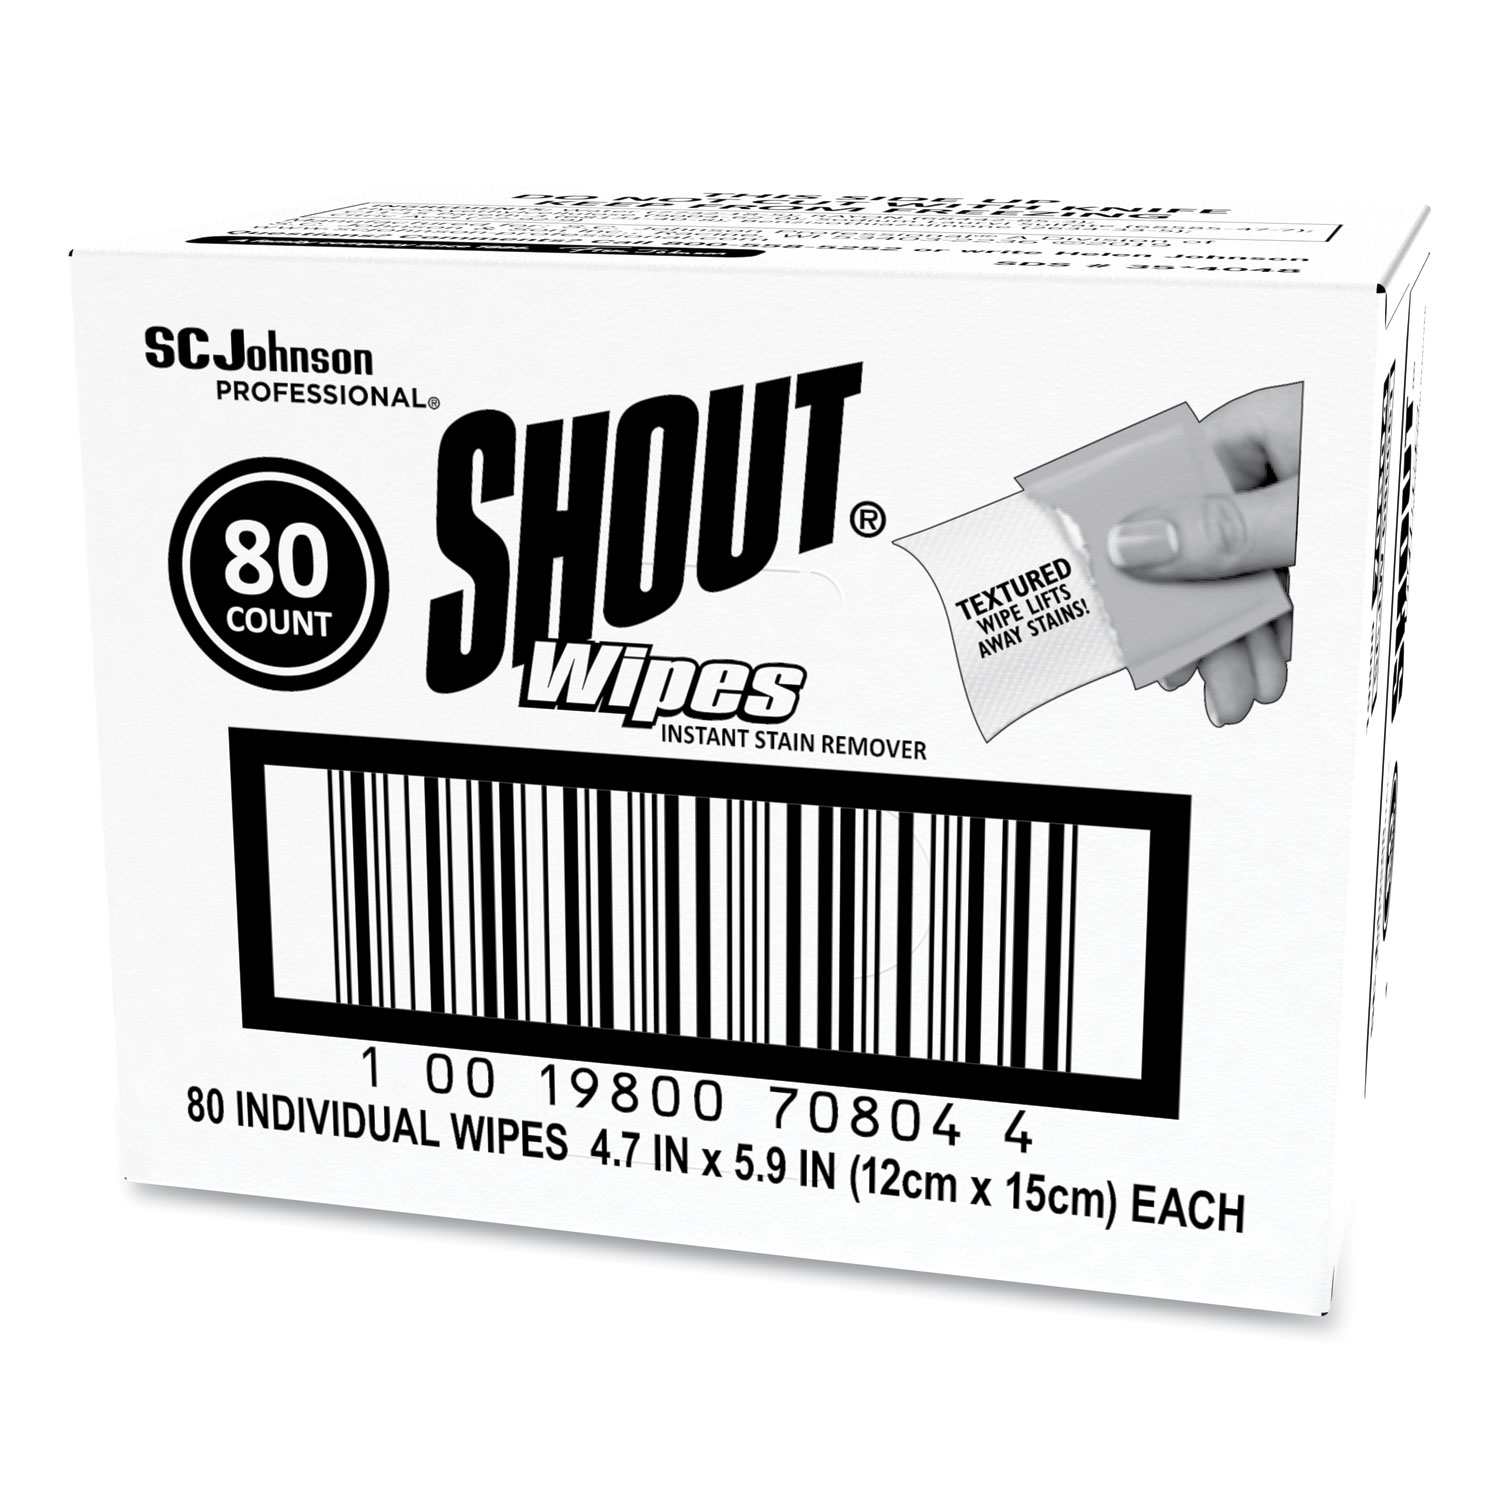 Shout Wipe & Go Wipes 12 ct